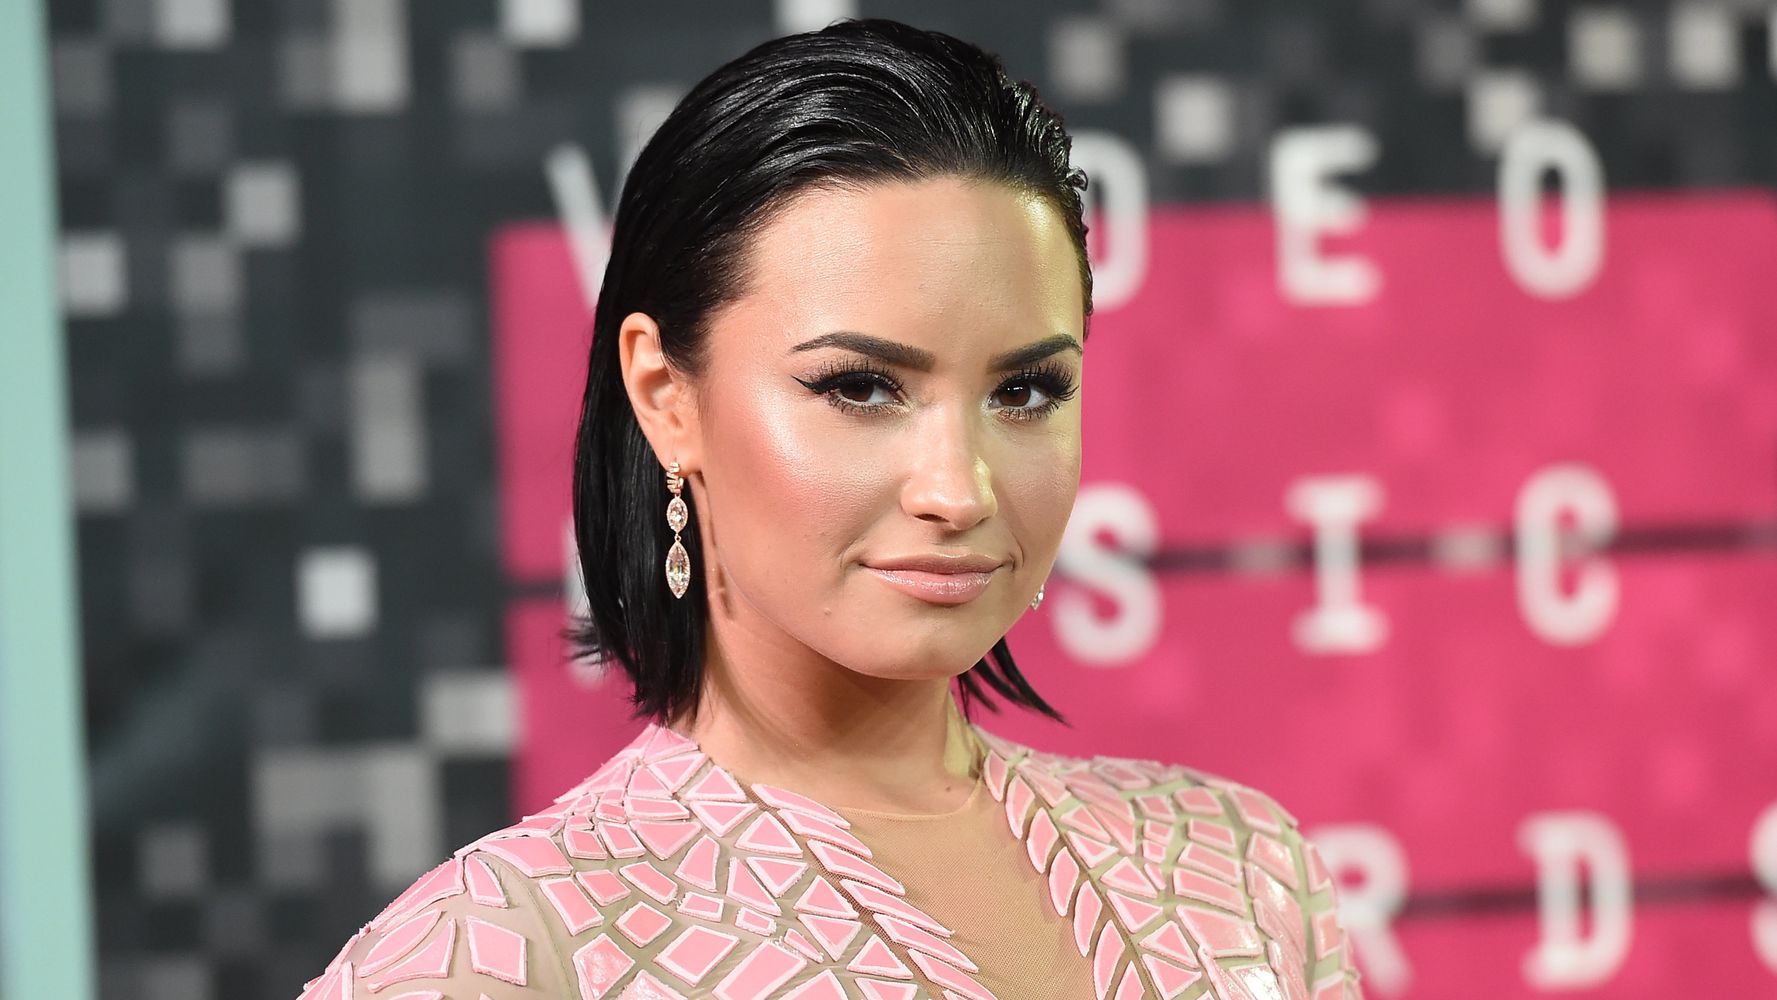 Demi Lovato's Bronze Glow, And More Celebrity Beauty Looks We Love